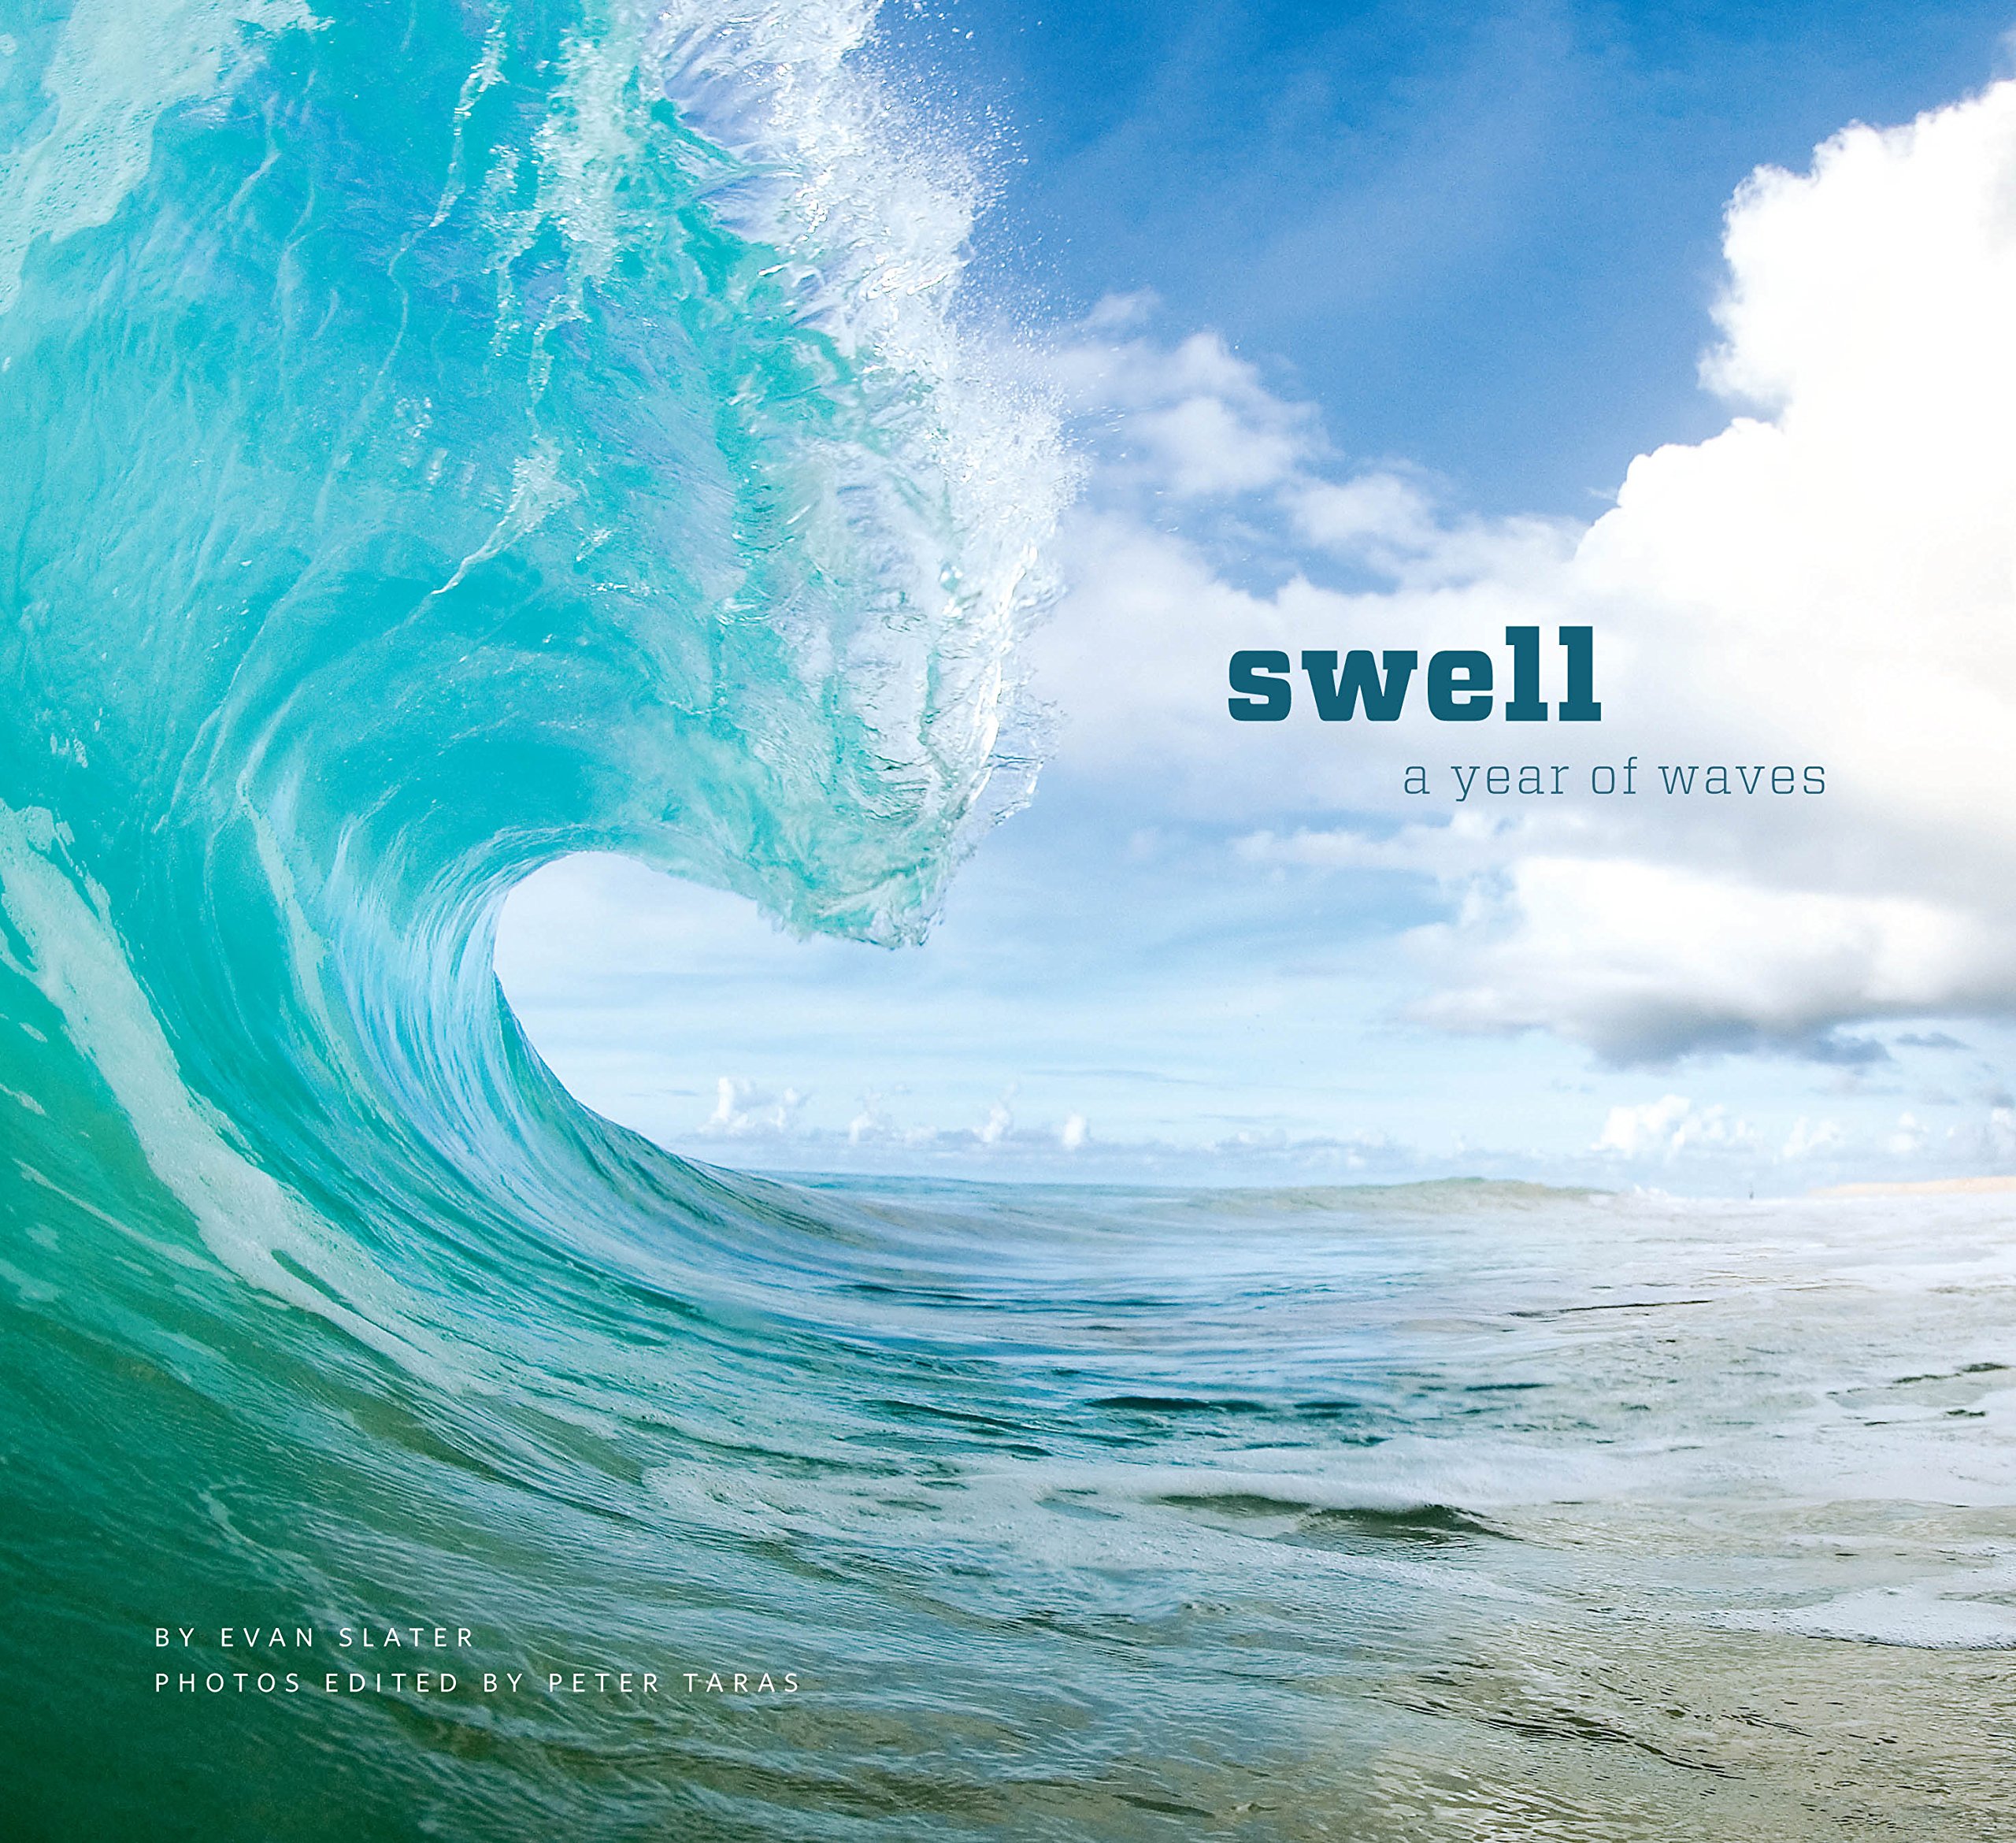 Swell: A Year of Waves: Evan Slater: 9781452105932: Amazon.com: Books